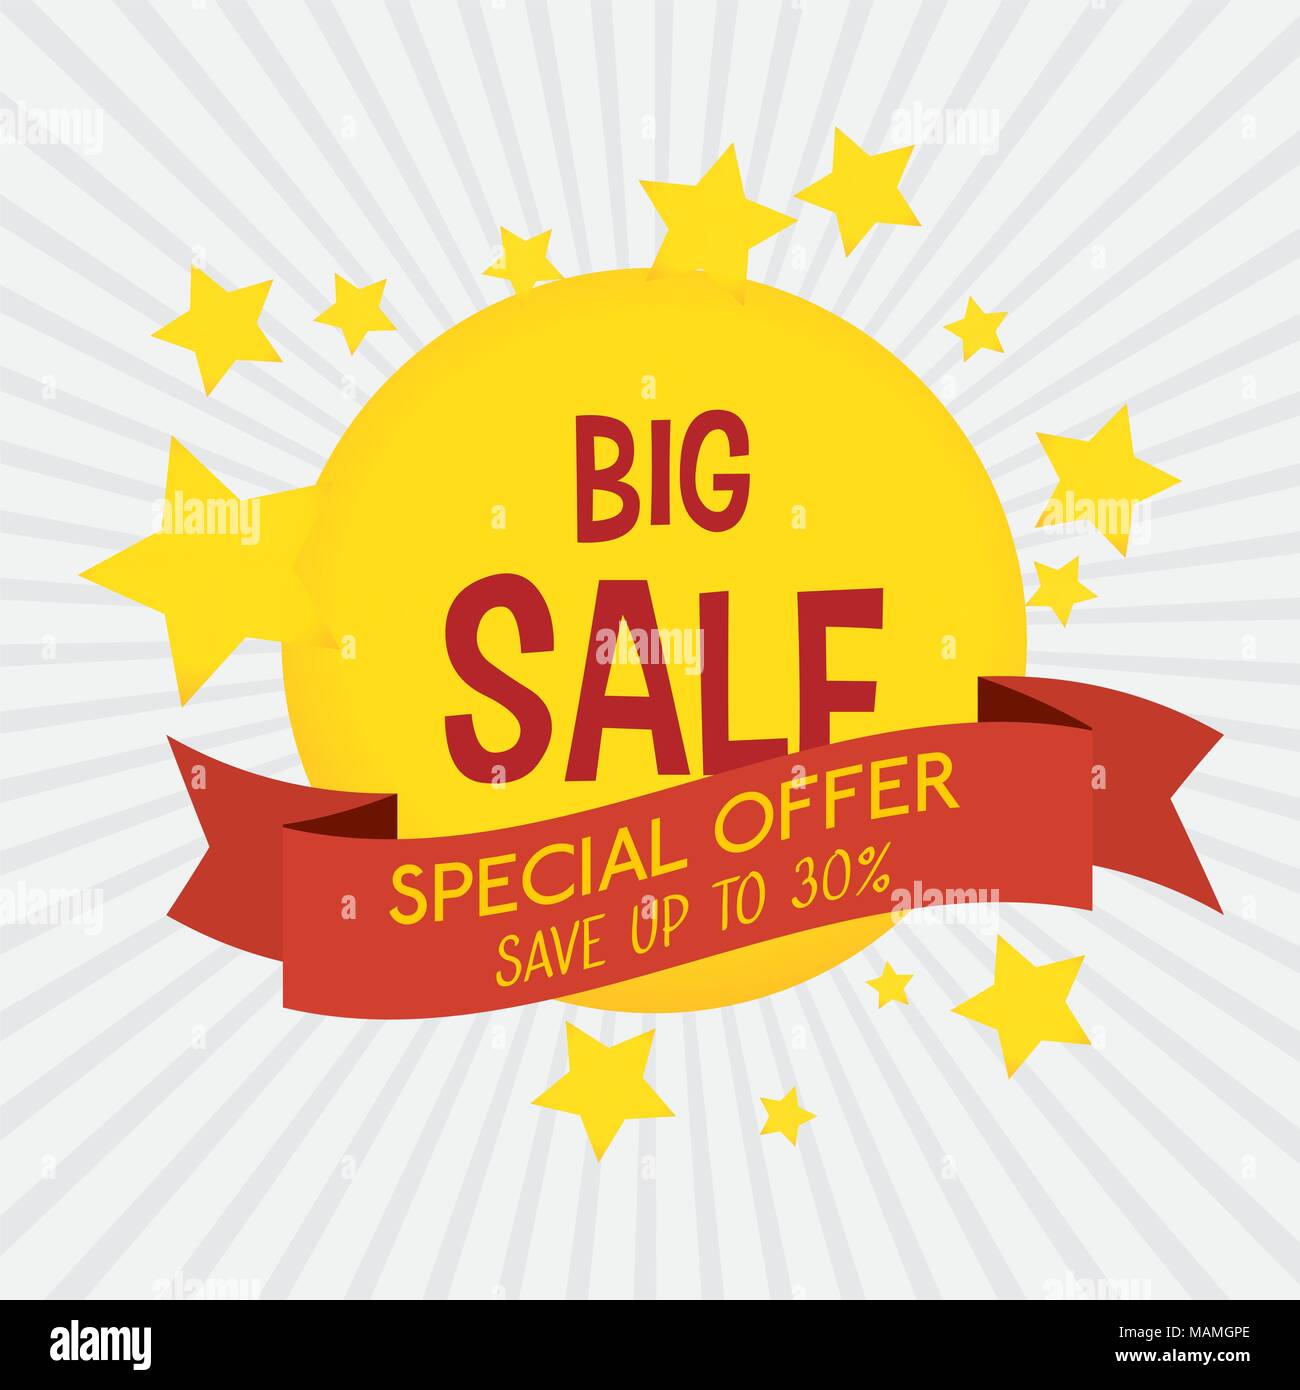 Shopping special offers Stock Vector